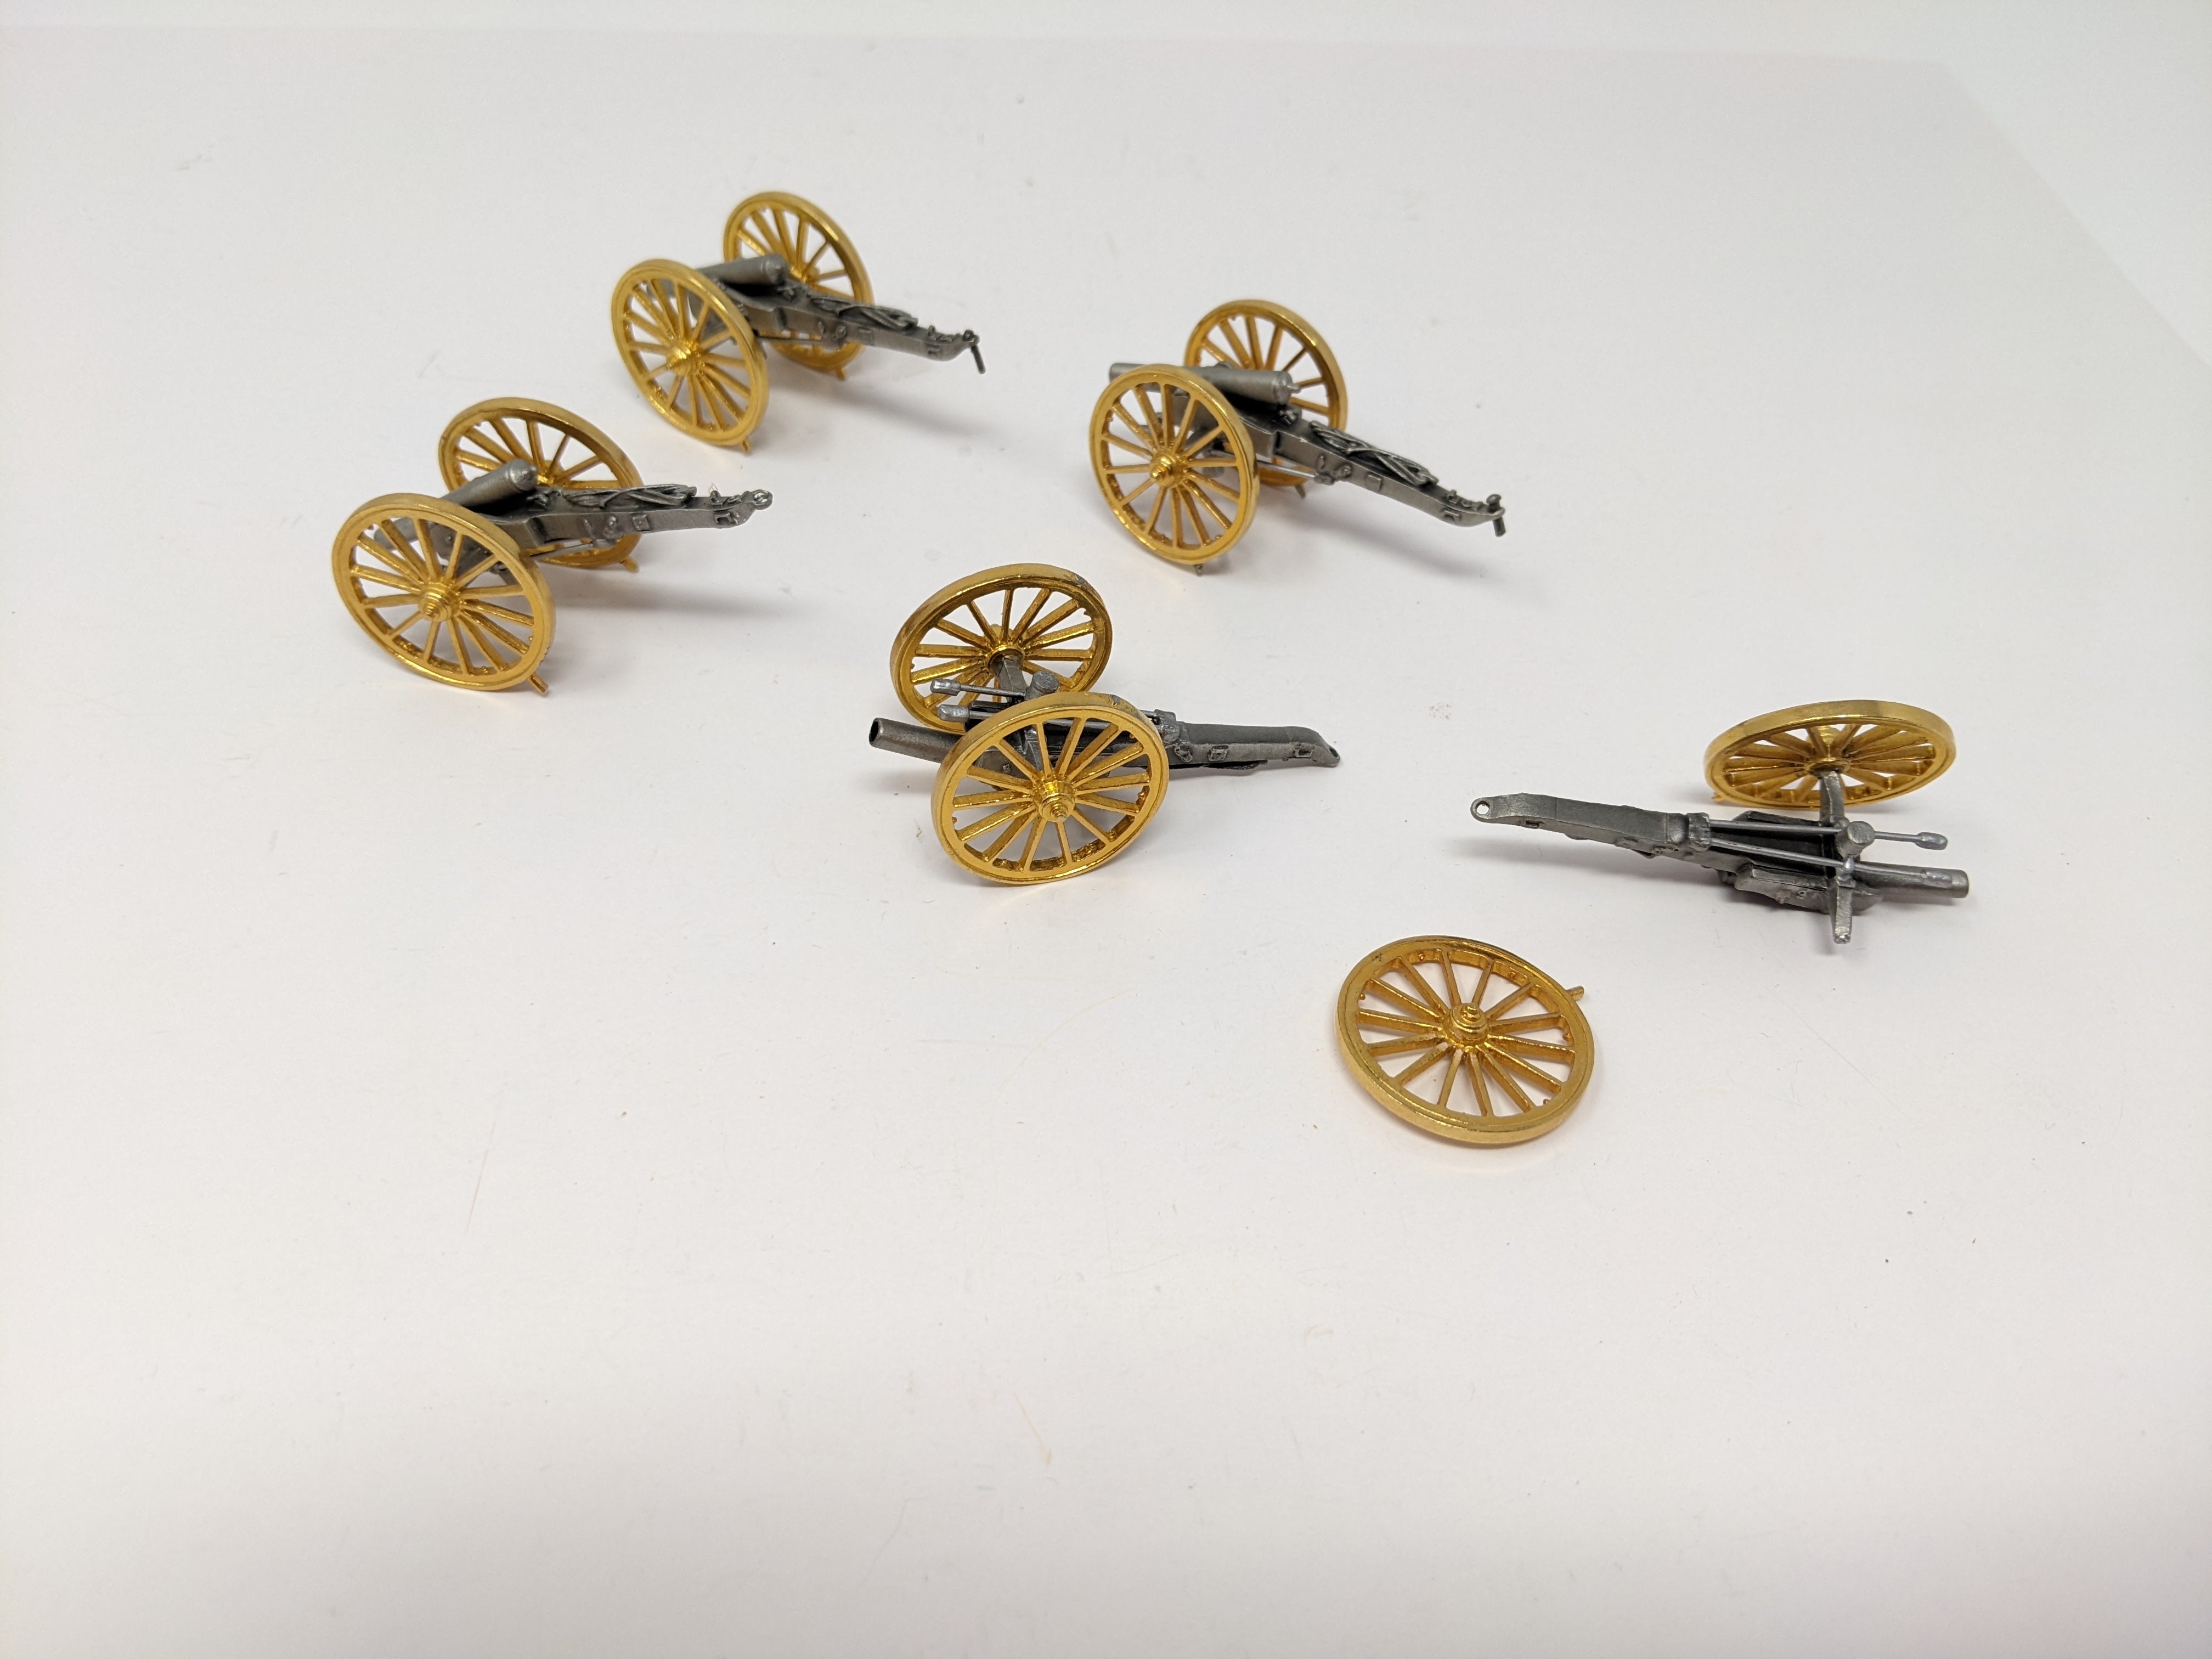 USED , Miniature Iron Cannon Replicas - Lot of 5